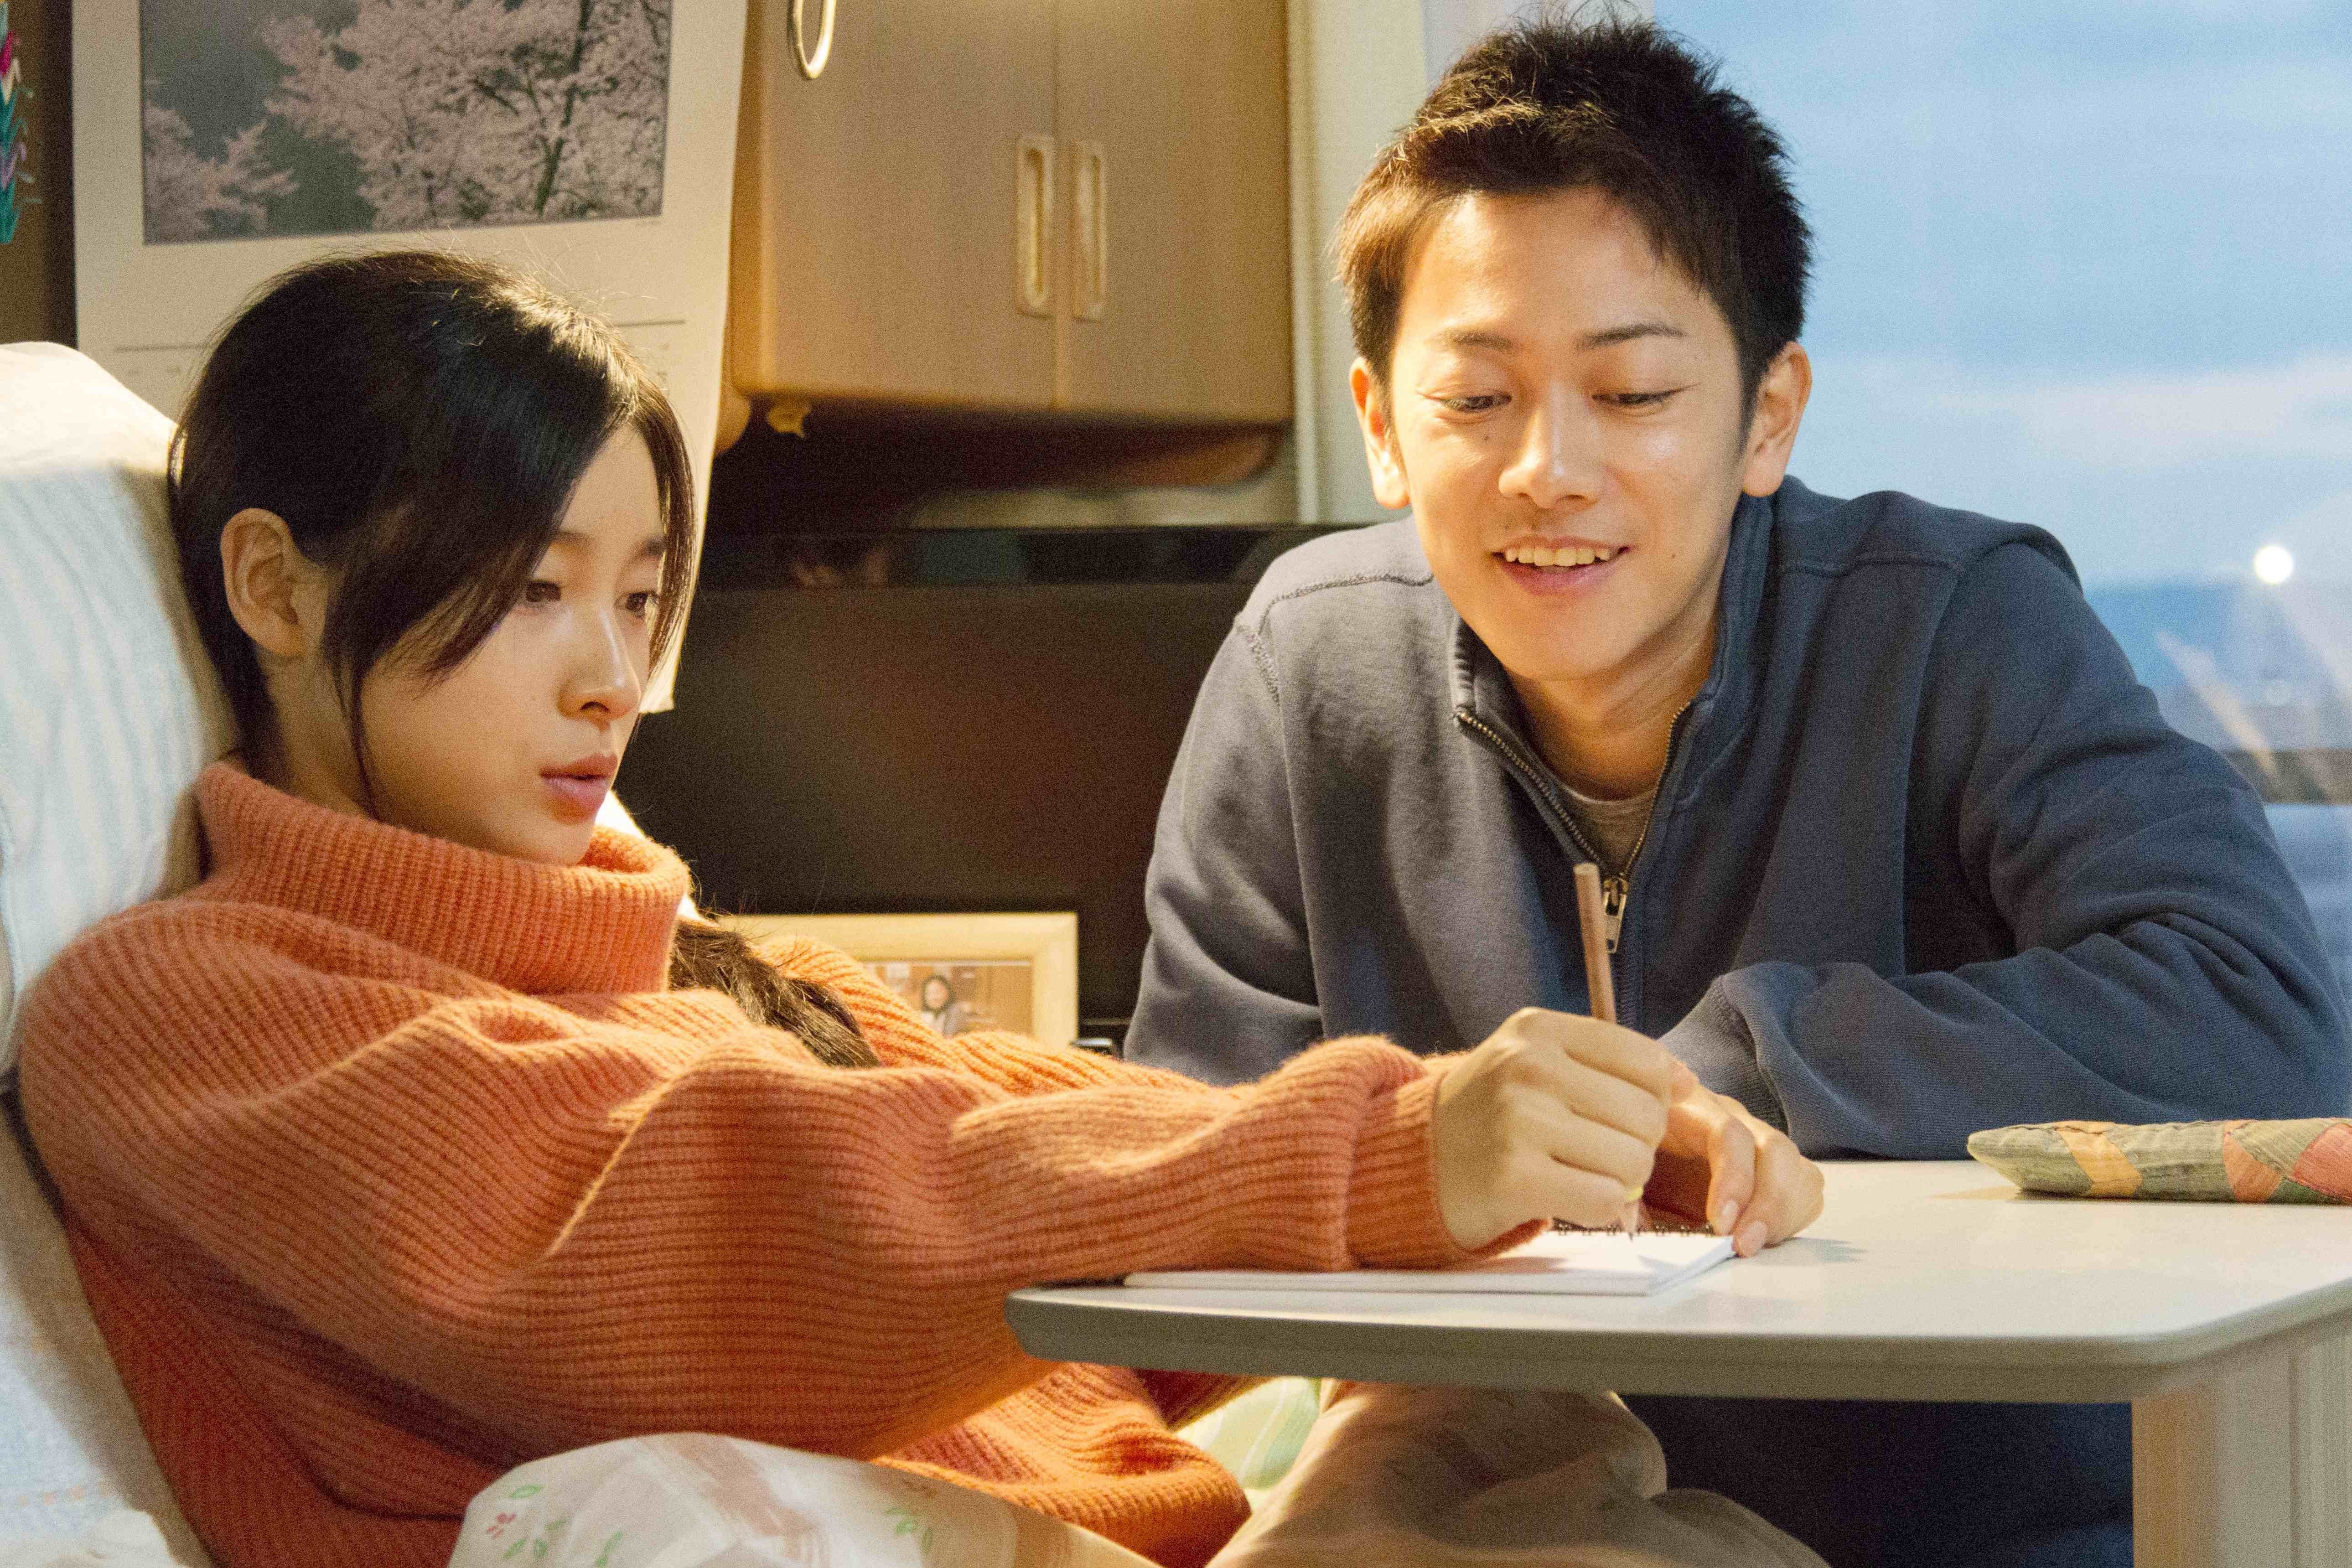 The 8 Year Engagement Film Review Tear Jerking Japanese Romance Based On An Incredible True Story South China Morning Post